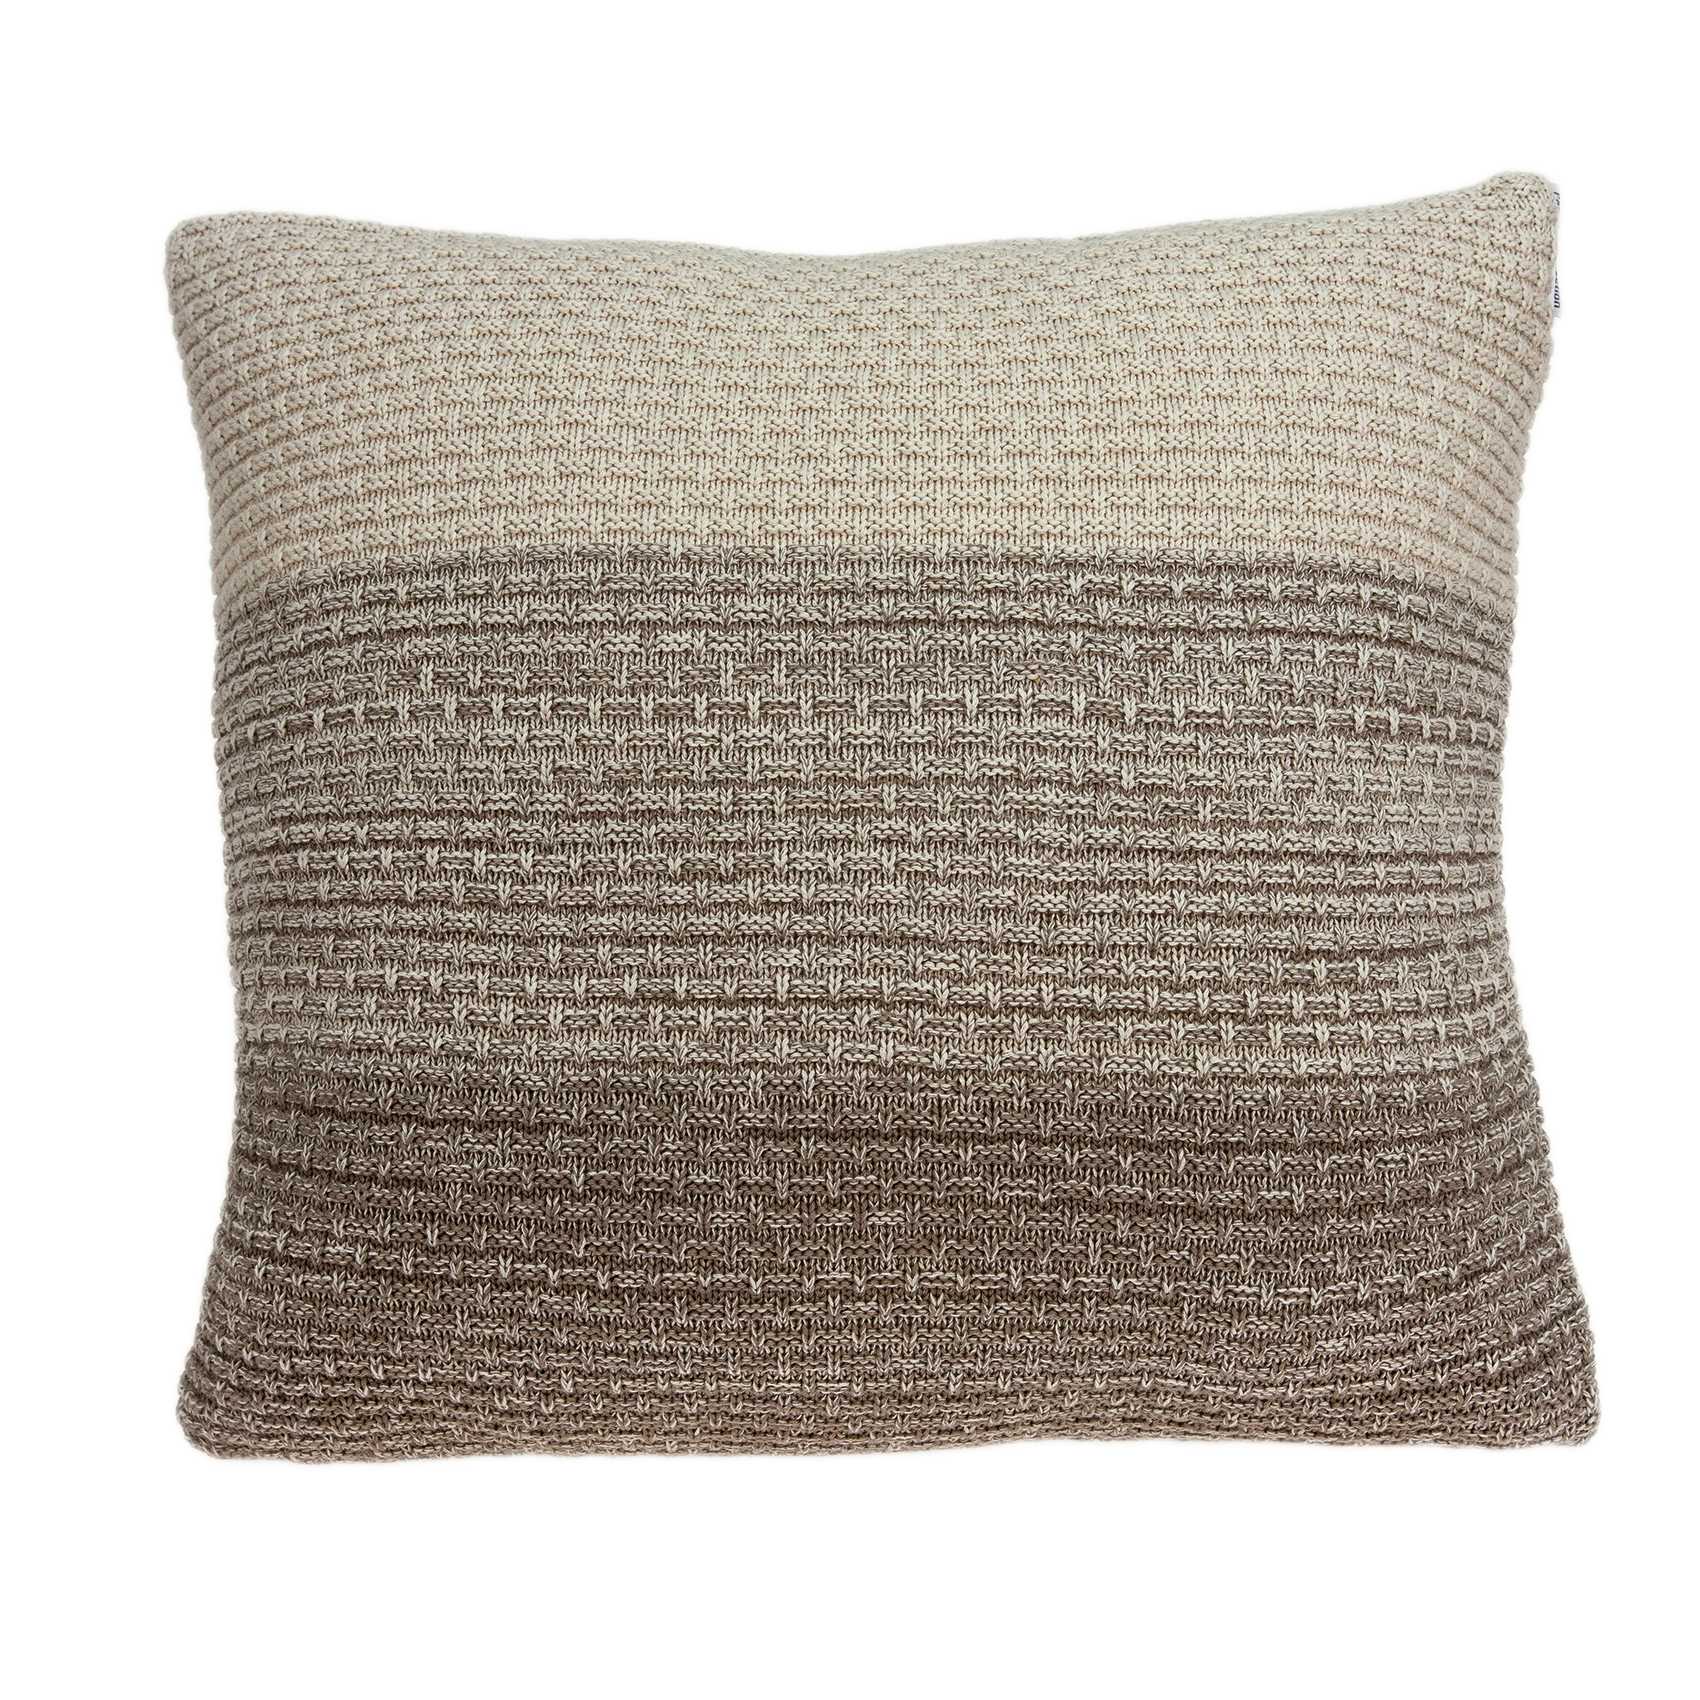 20" X 20" Beige and Brown Cotton Pillow